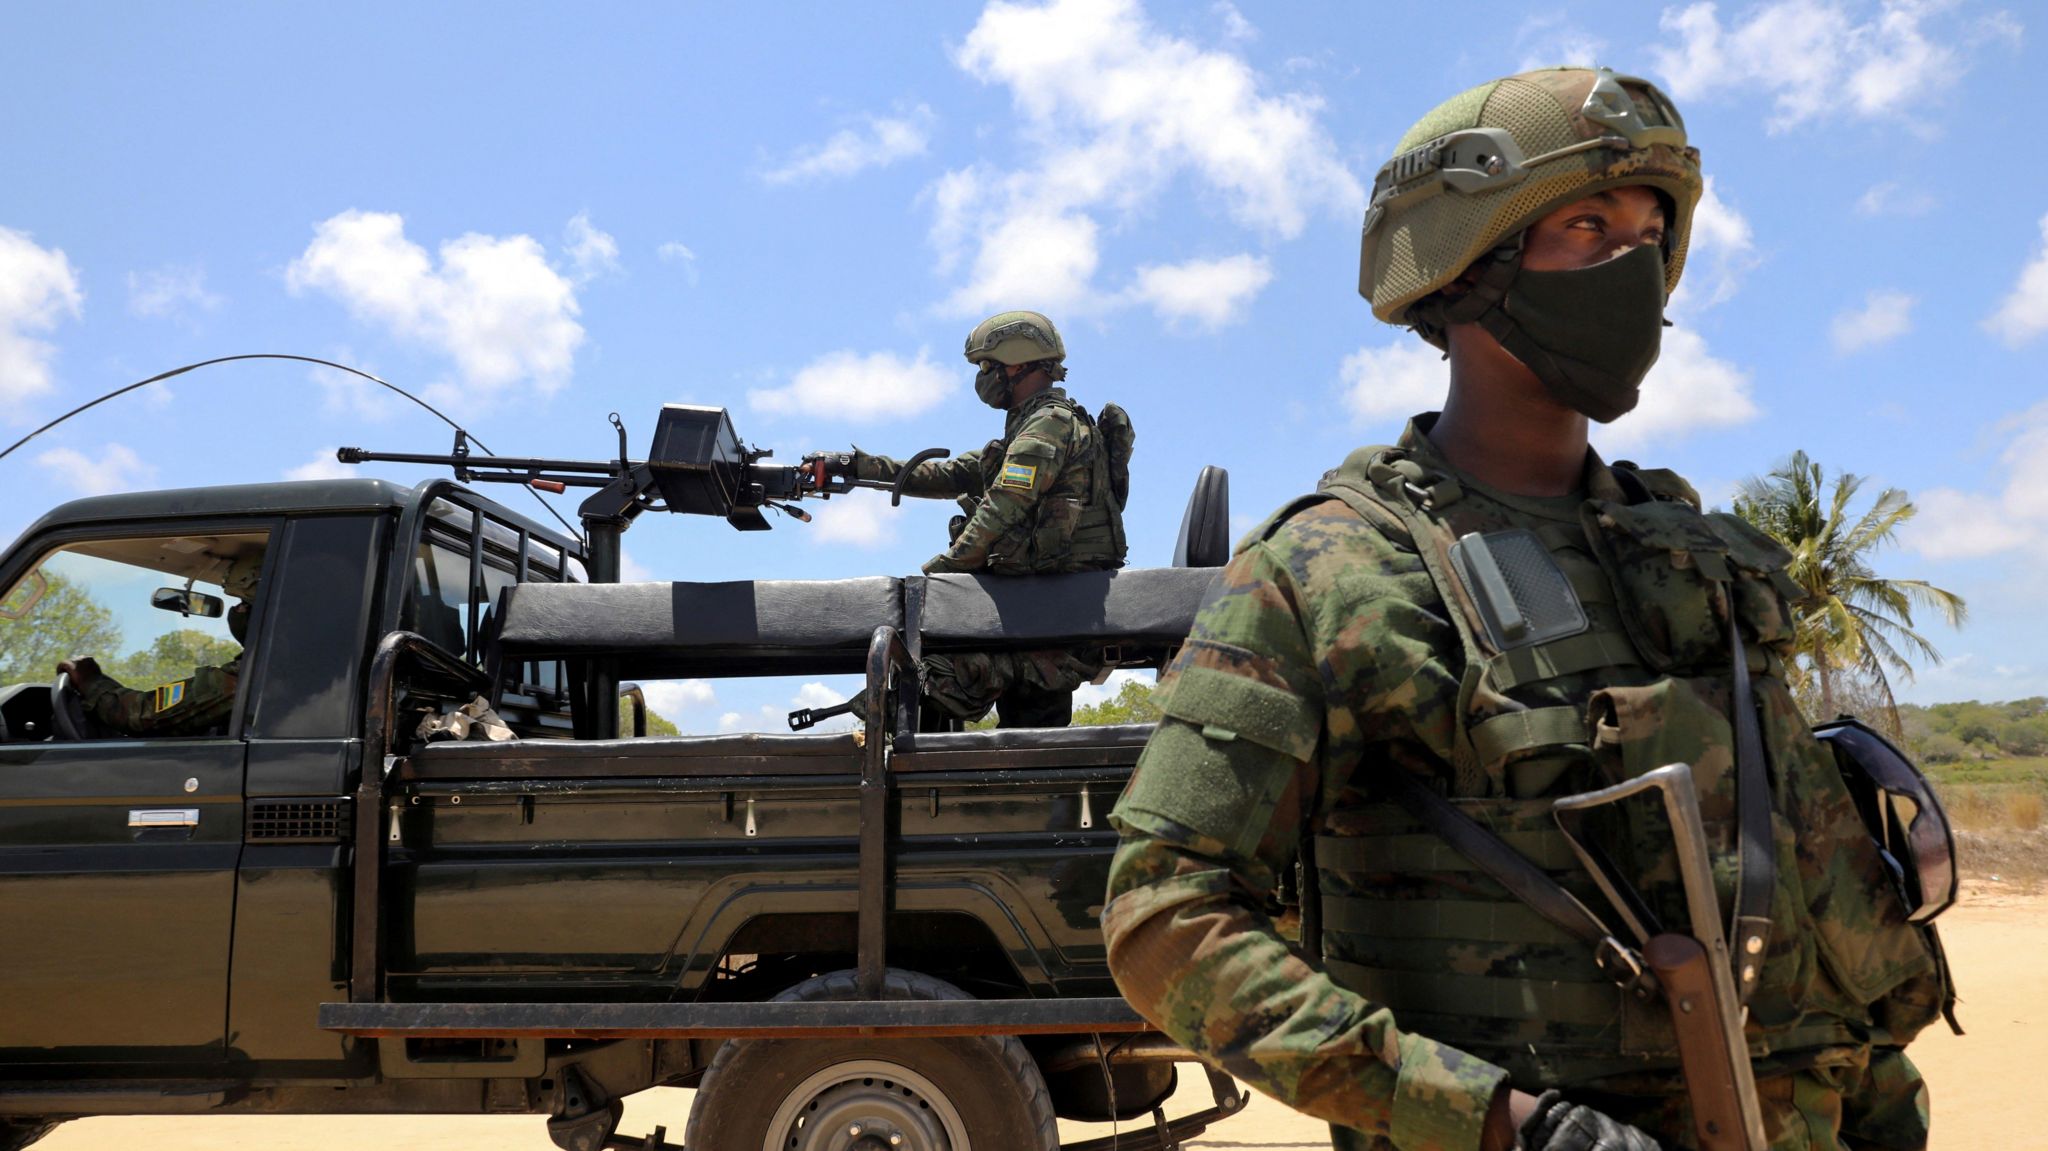  Soldiers from the Rwandan security forces near the Afungi natural gas site in Mozambique in 2021